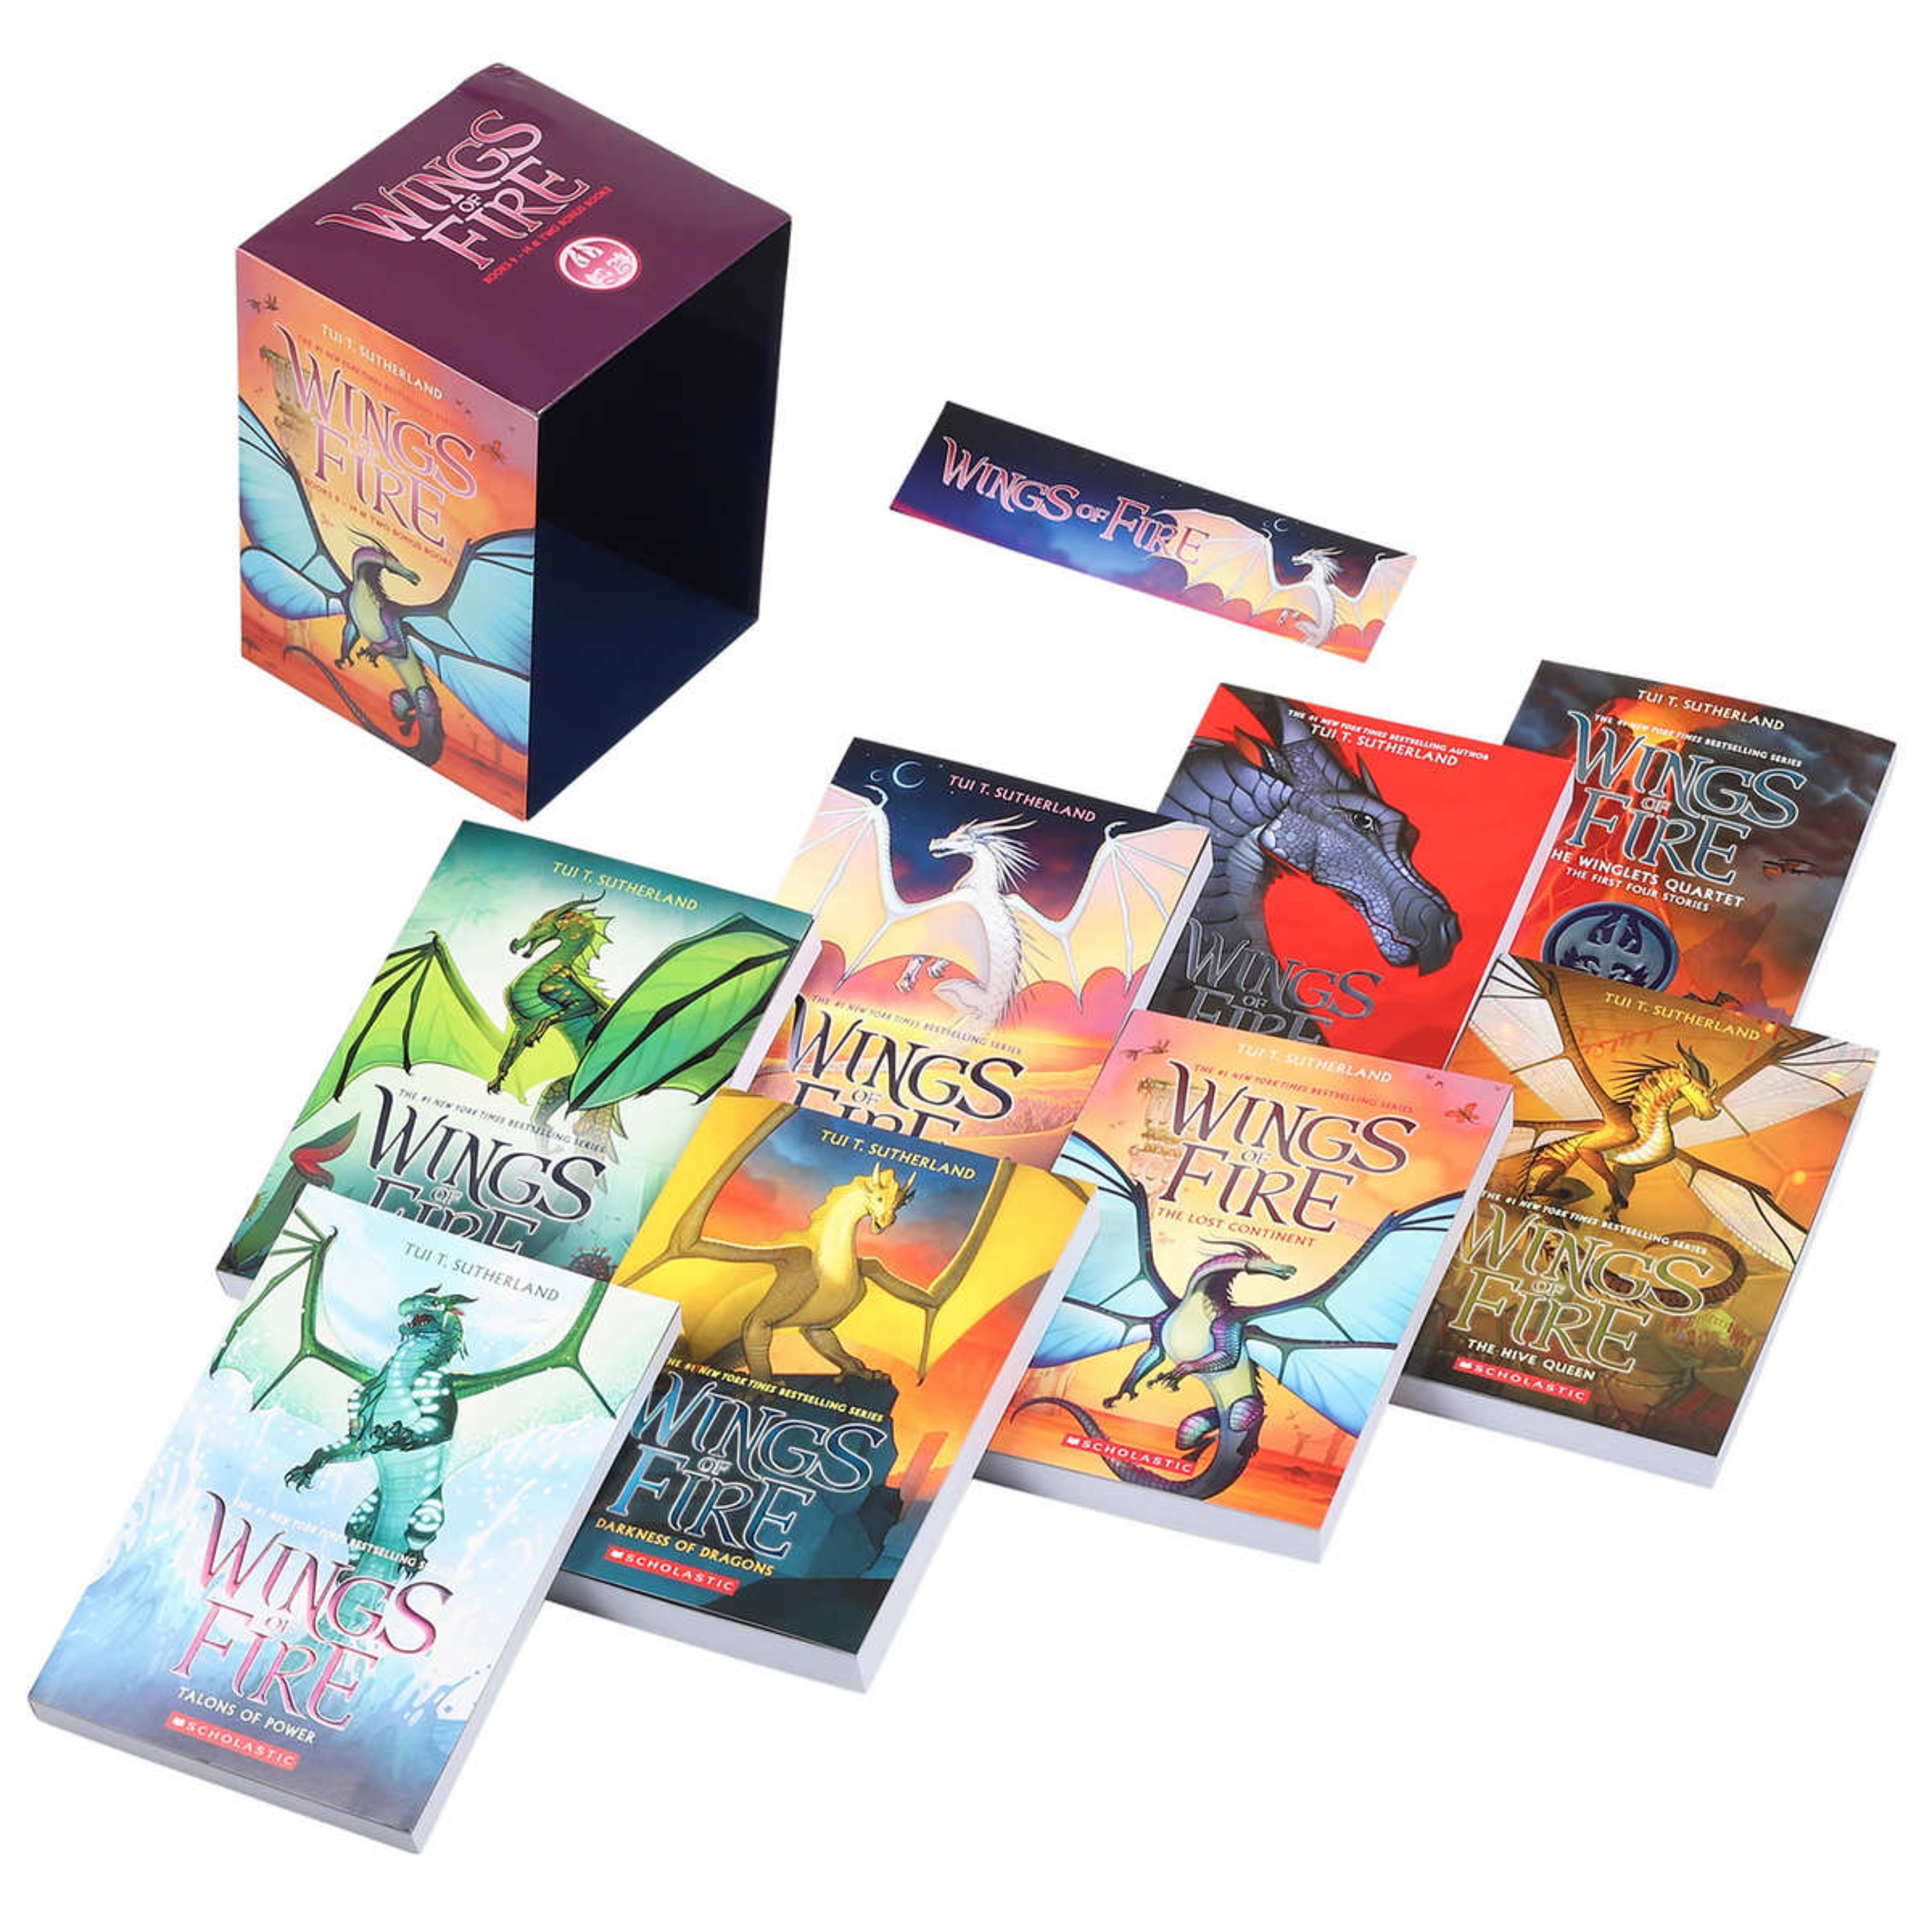 Wings of Fire: Books 1-8 Box Set